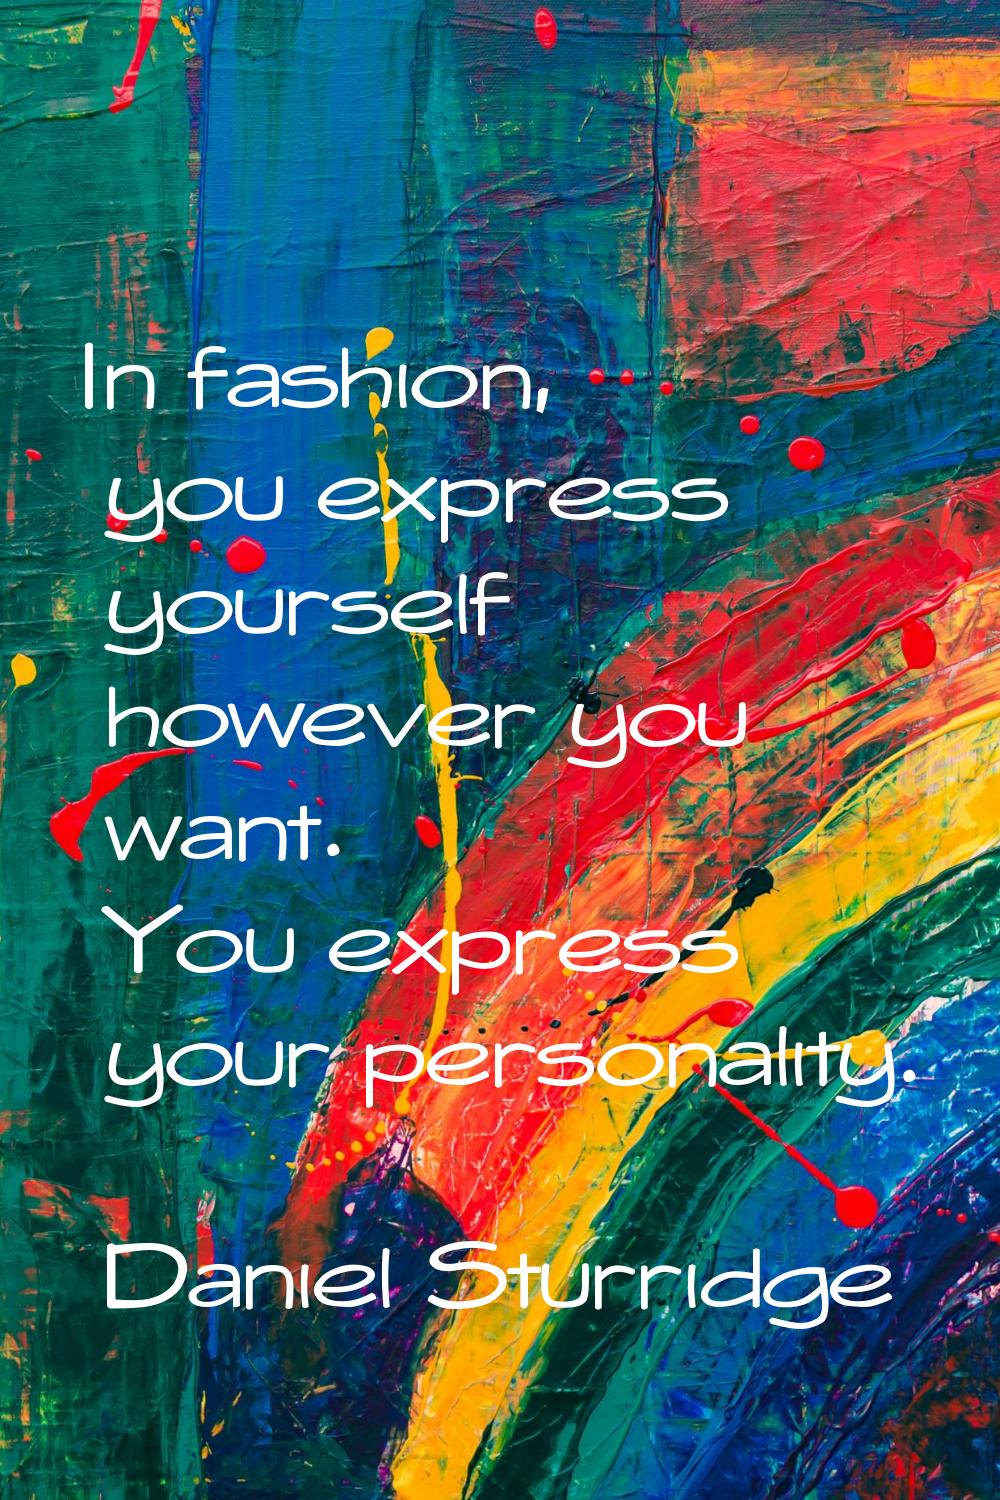 In fashion, you express yourself however you want. You express your personality.